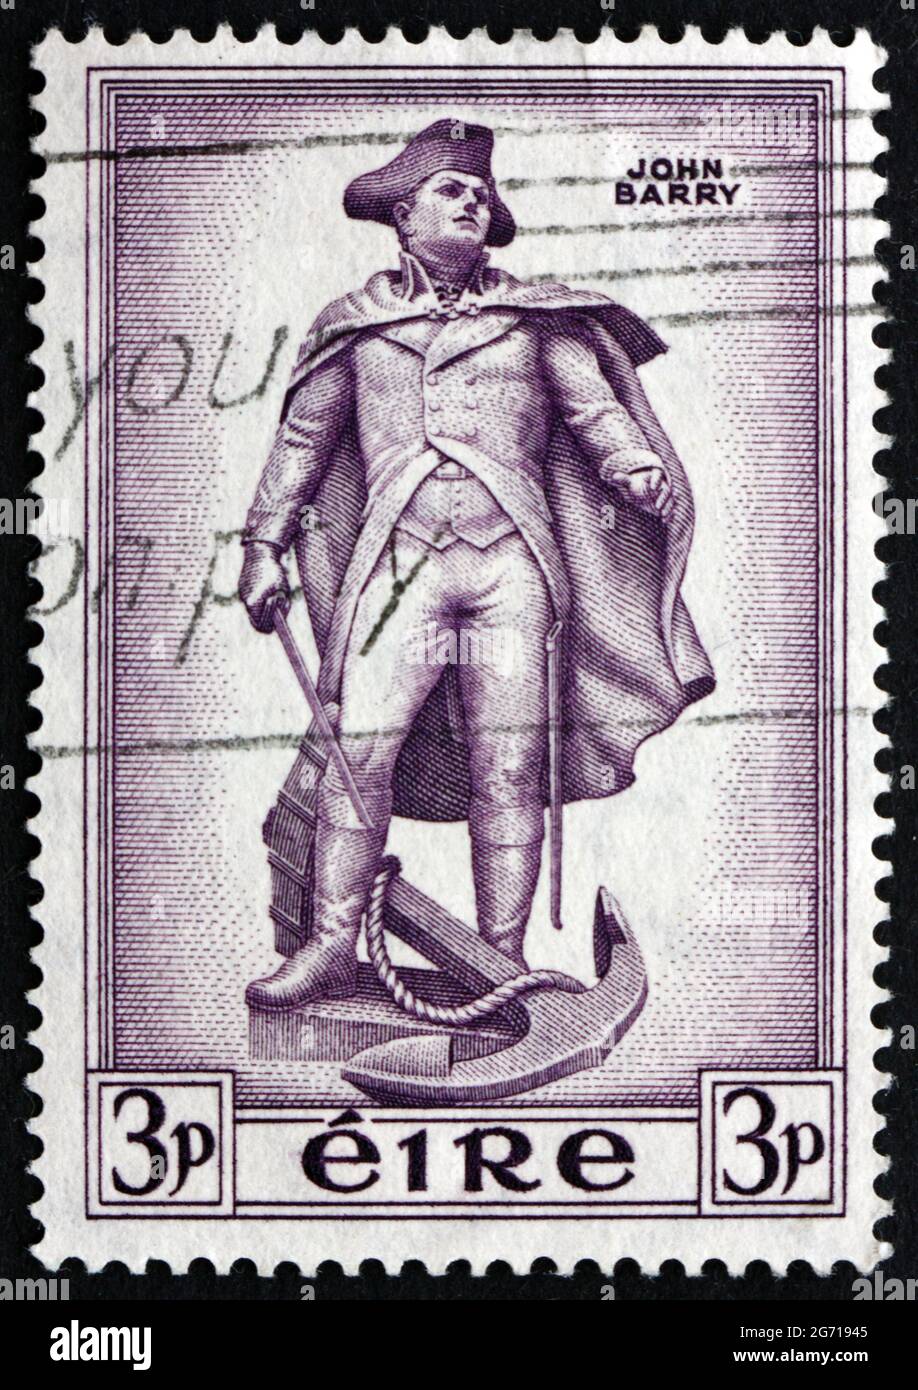 IRELAND - CIRCA 1954: a stamp printed in the Ireland shows Statue of John Barry, an Officer in the Continental Navy during the American Revolutionary Stock Photo